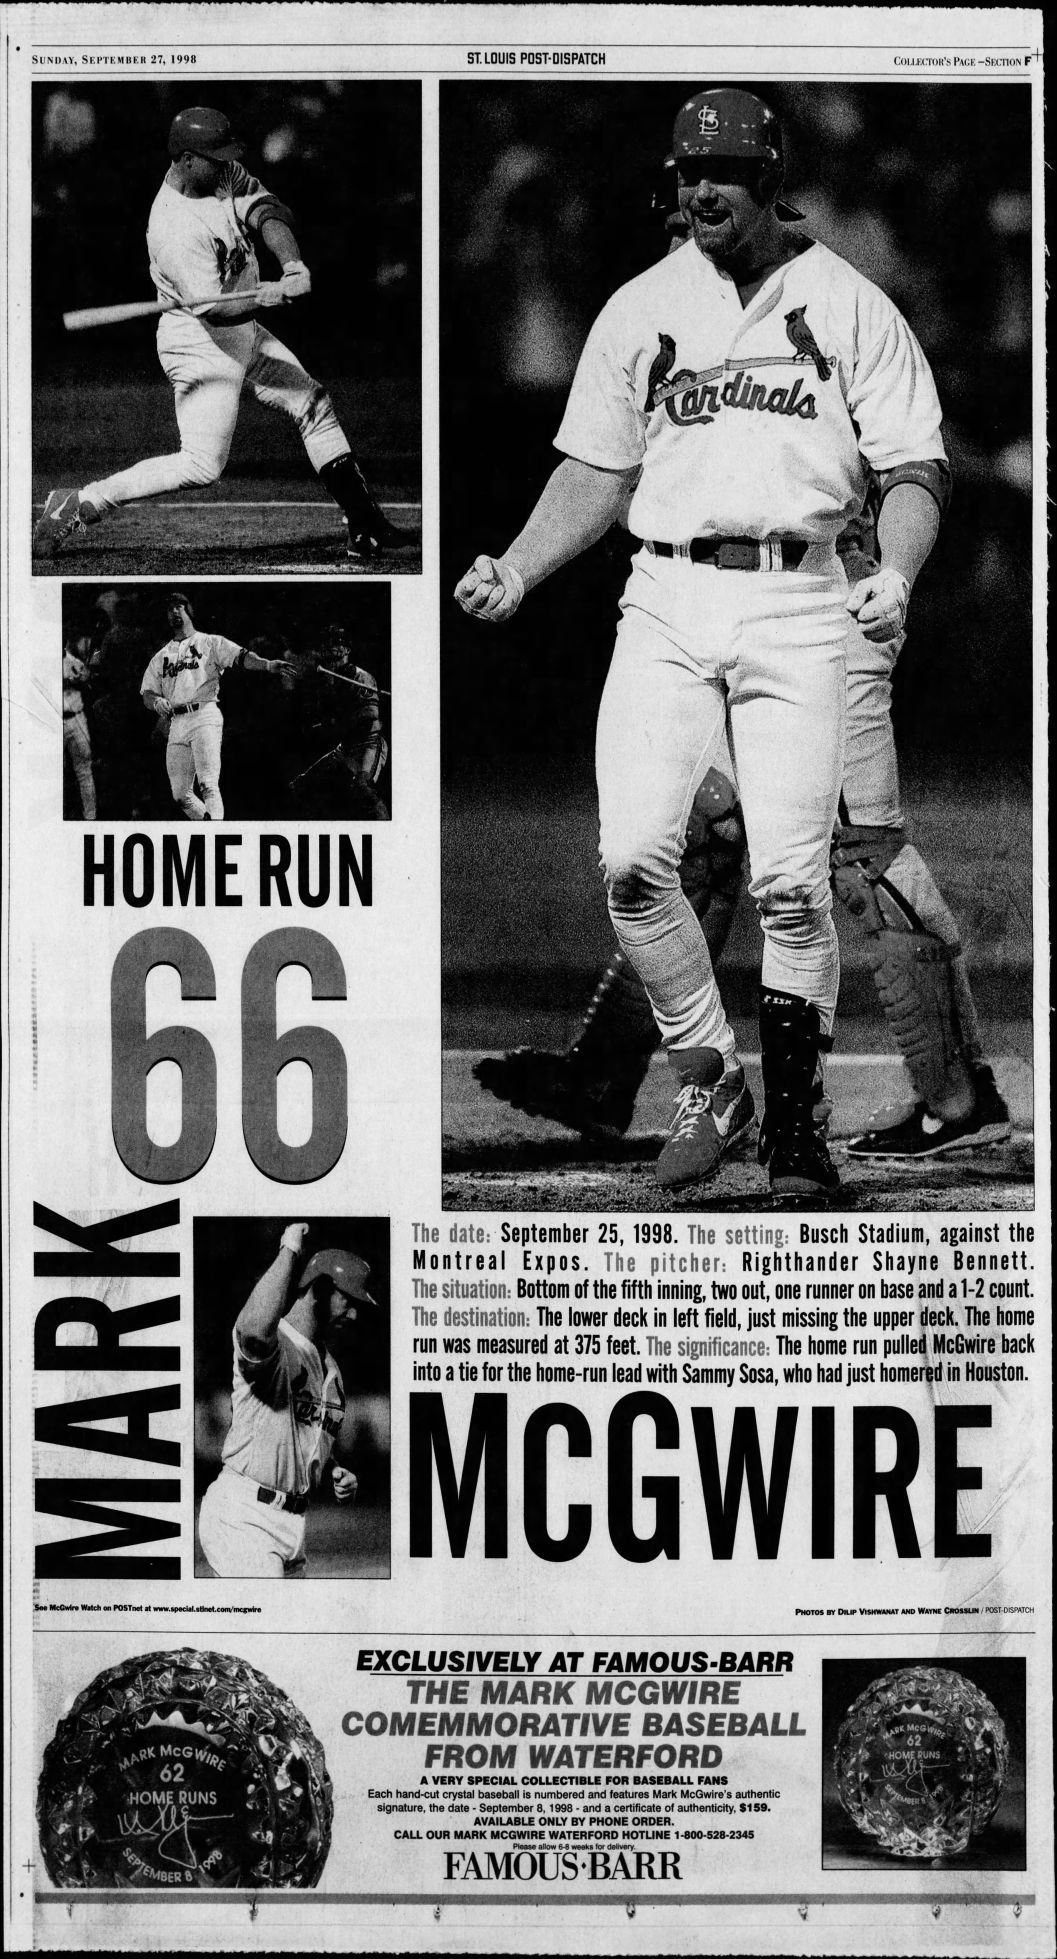 Sept. 27, 1998: McGwire hits 70 and is saluted as 'the new American sports  hero